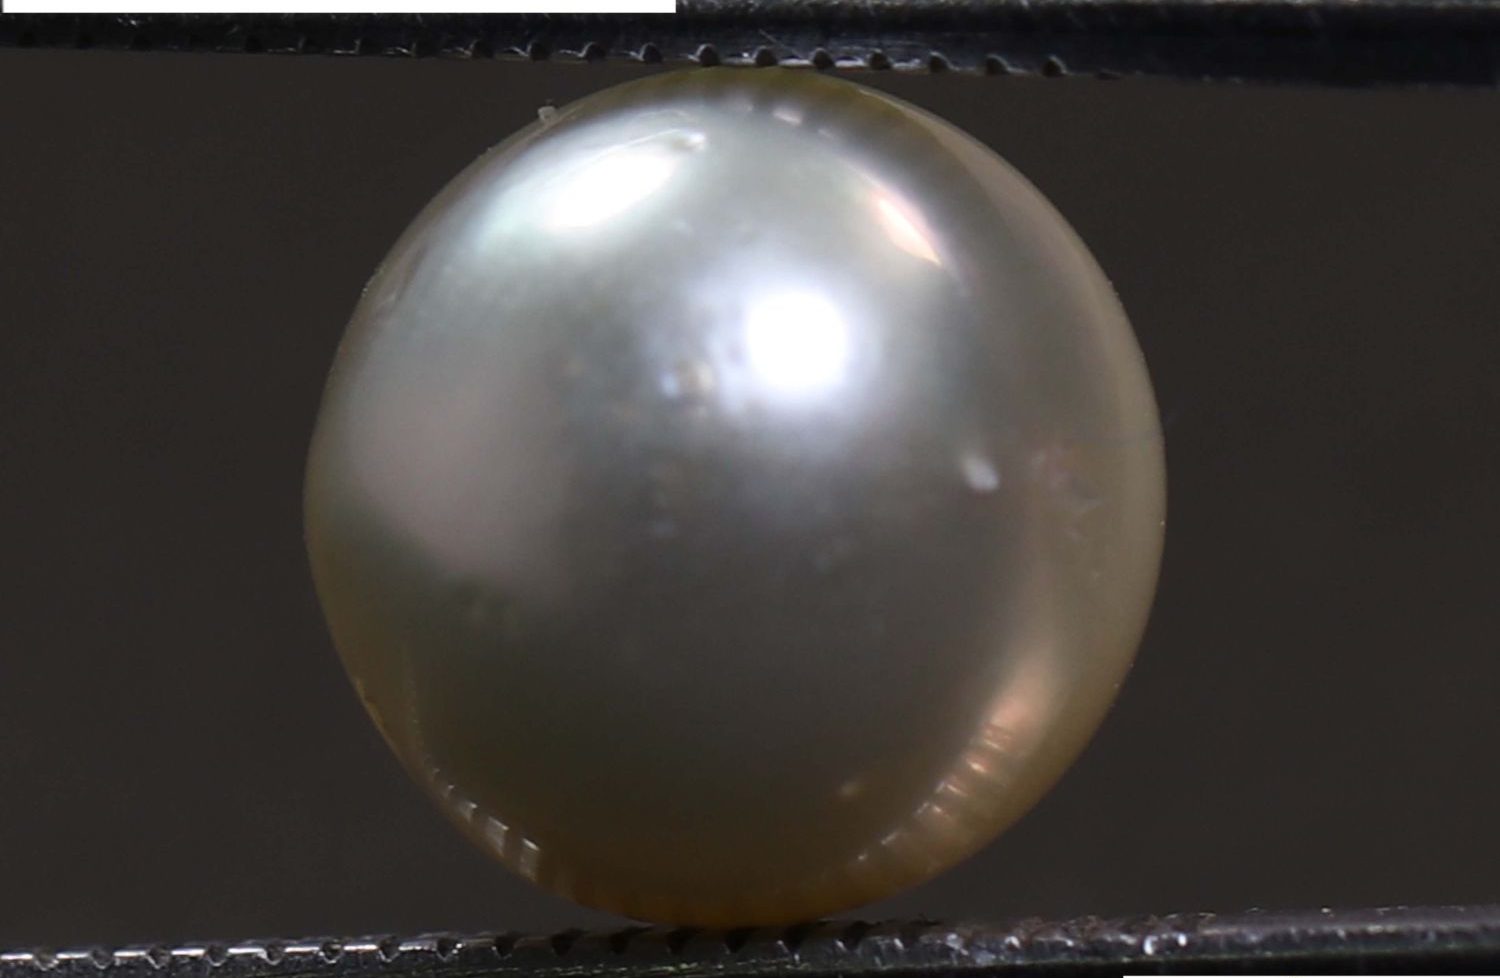 PEARL 5.91 Ct.